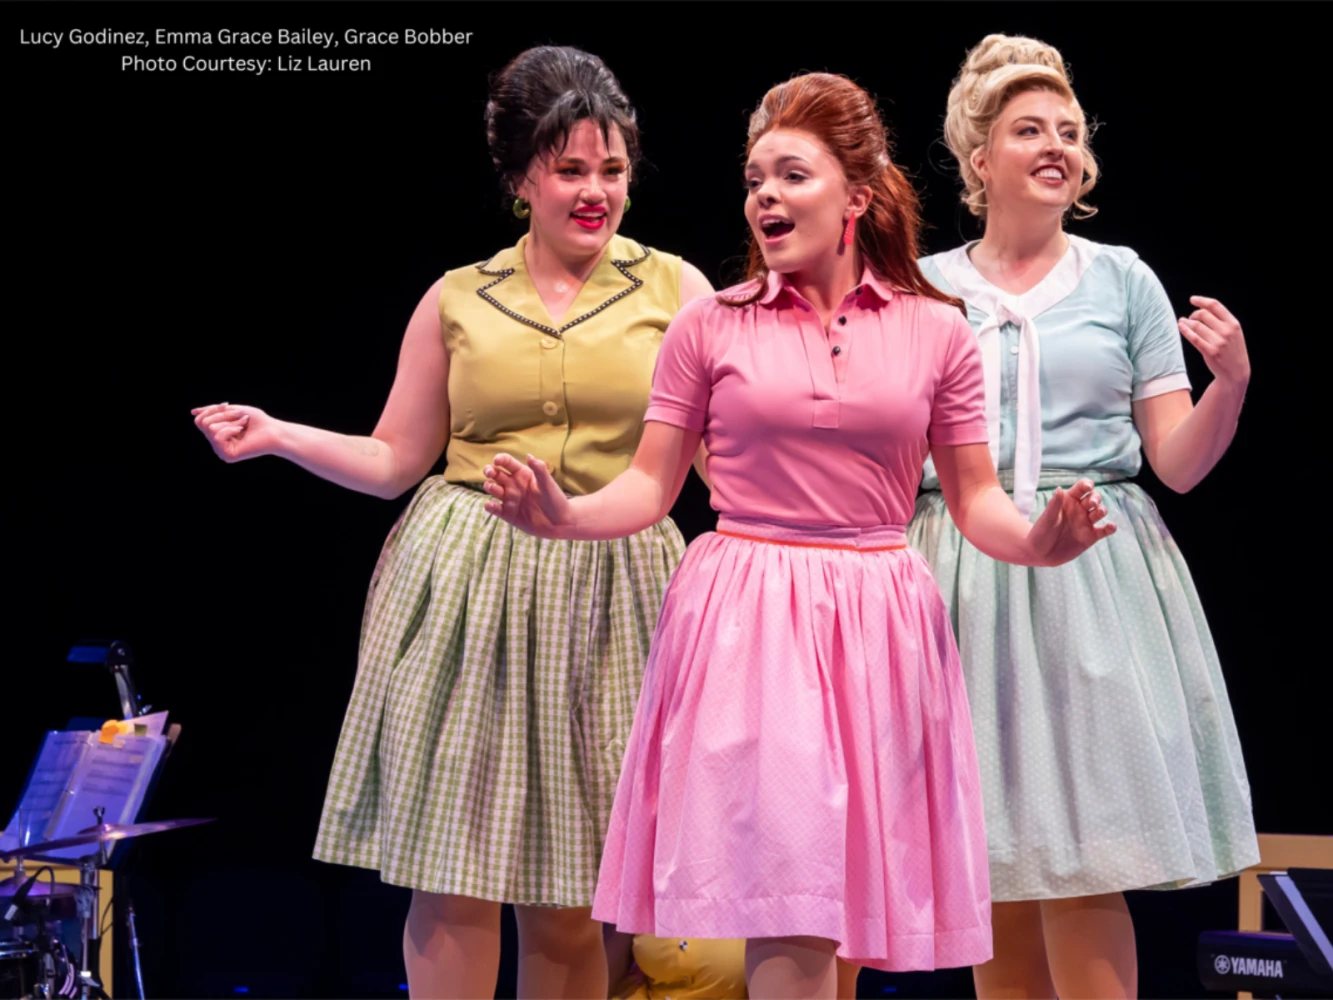 Beehive: The 60's Musical: What to expect - 7